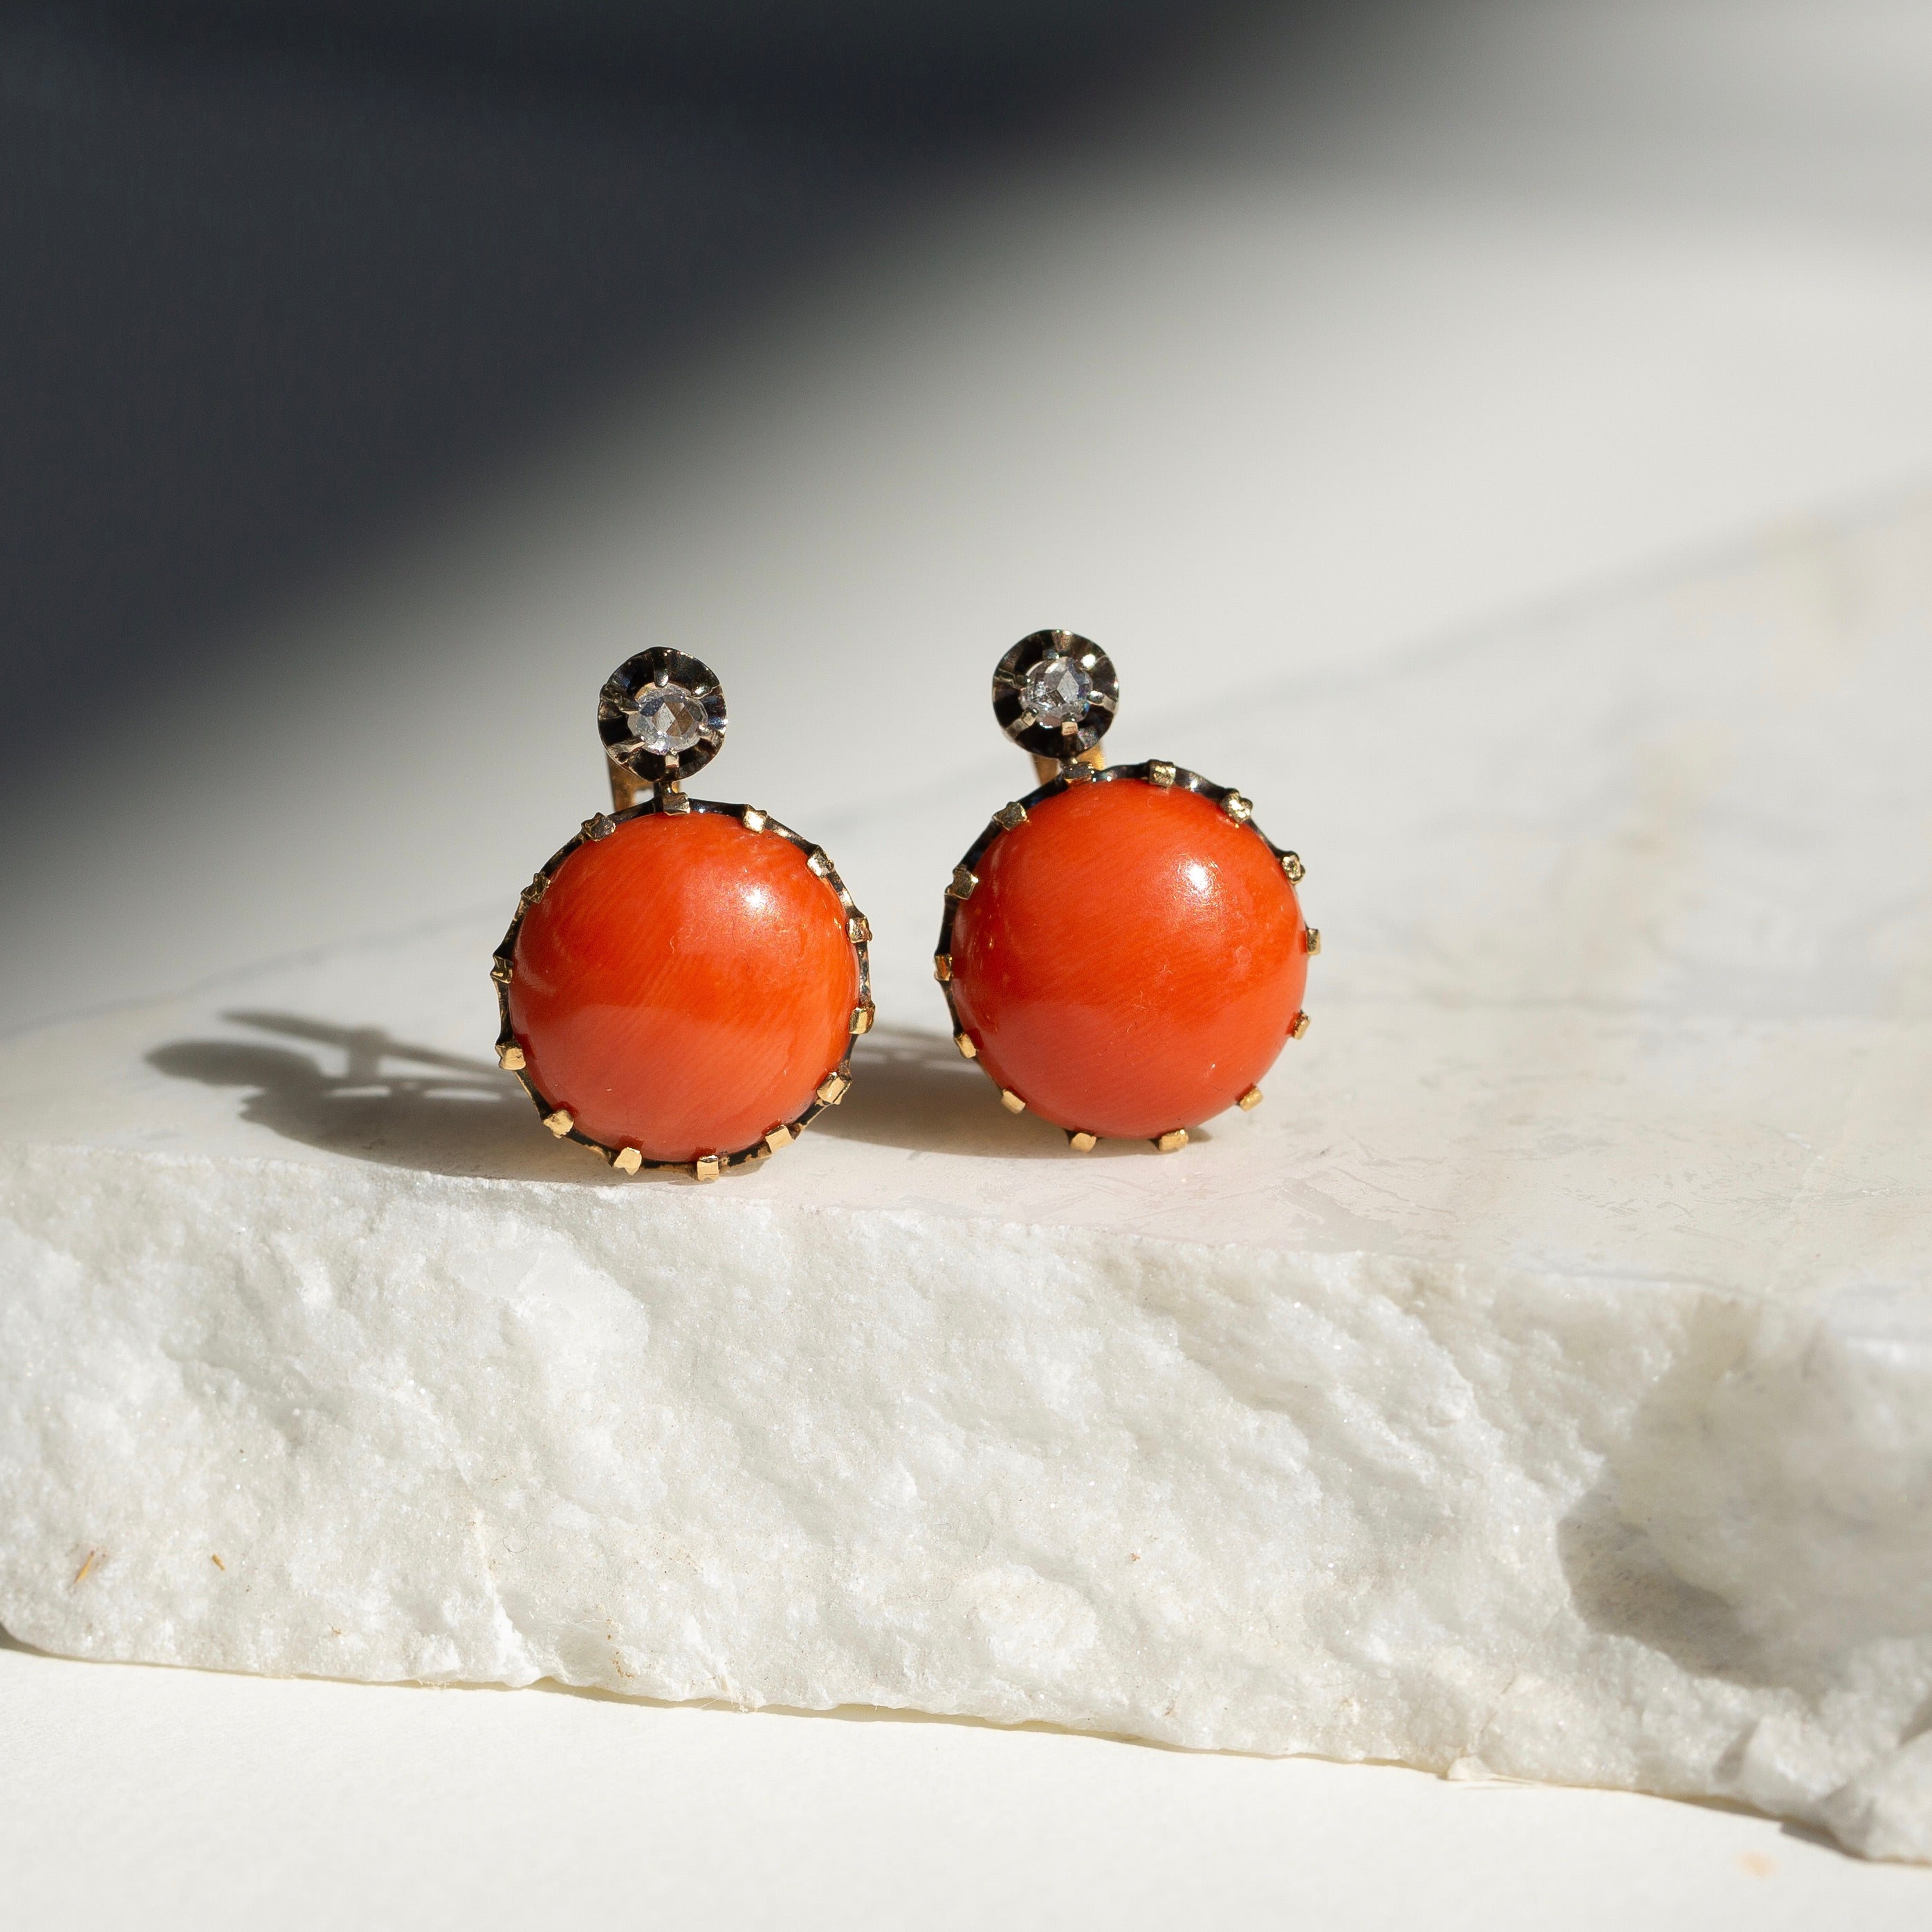 Victorian Coral, Diamond, and 18K Gold Drop Earrings